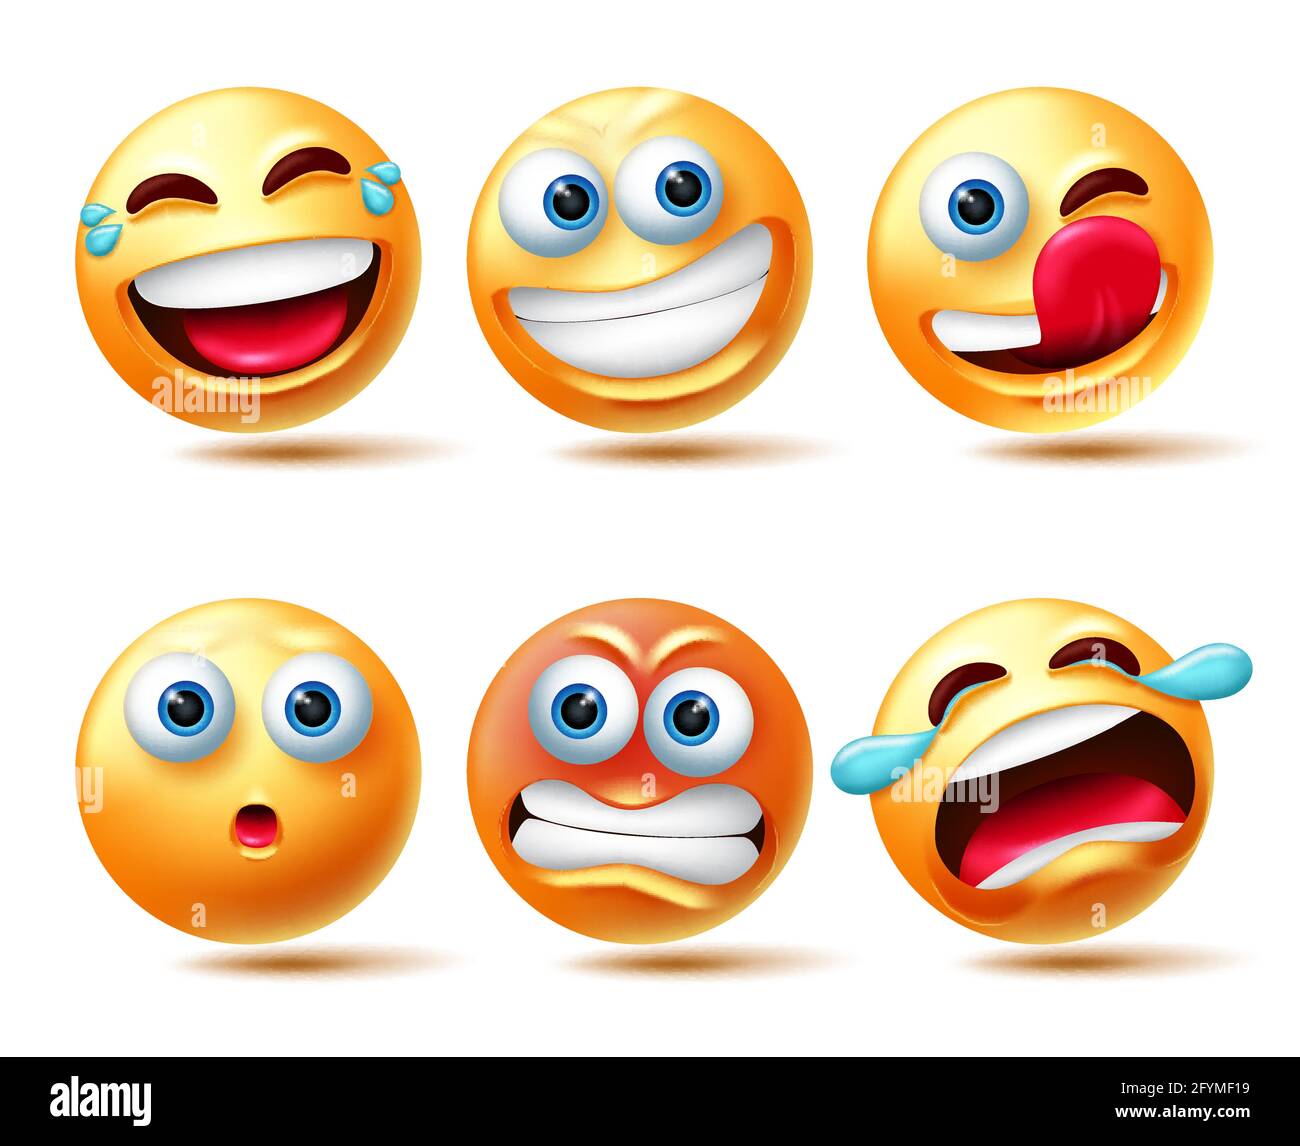 Emoticon smileys vector set. Smiley 3d emojis character in facial expressions like laughing, angry and crying for emoticons character collection. Stock Vector